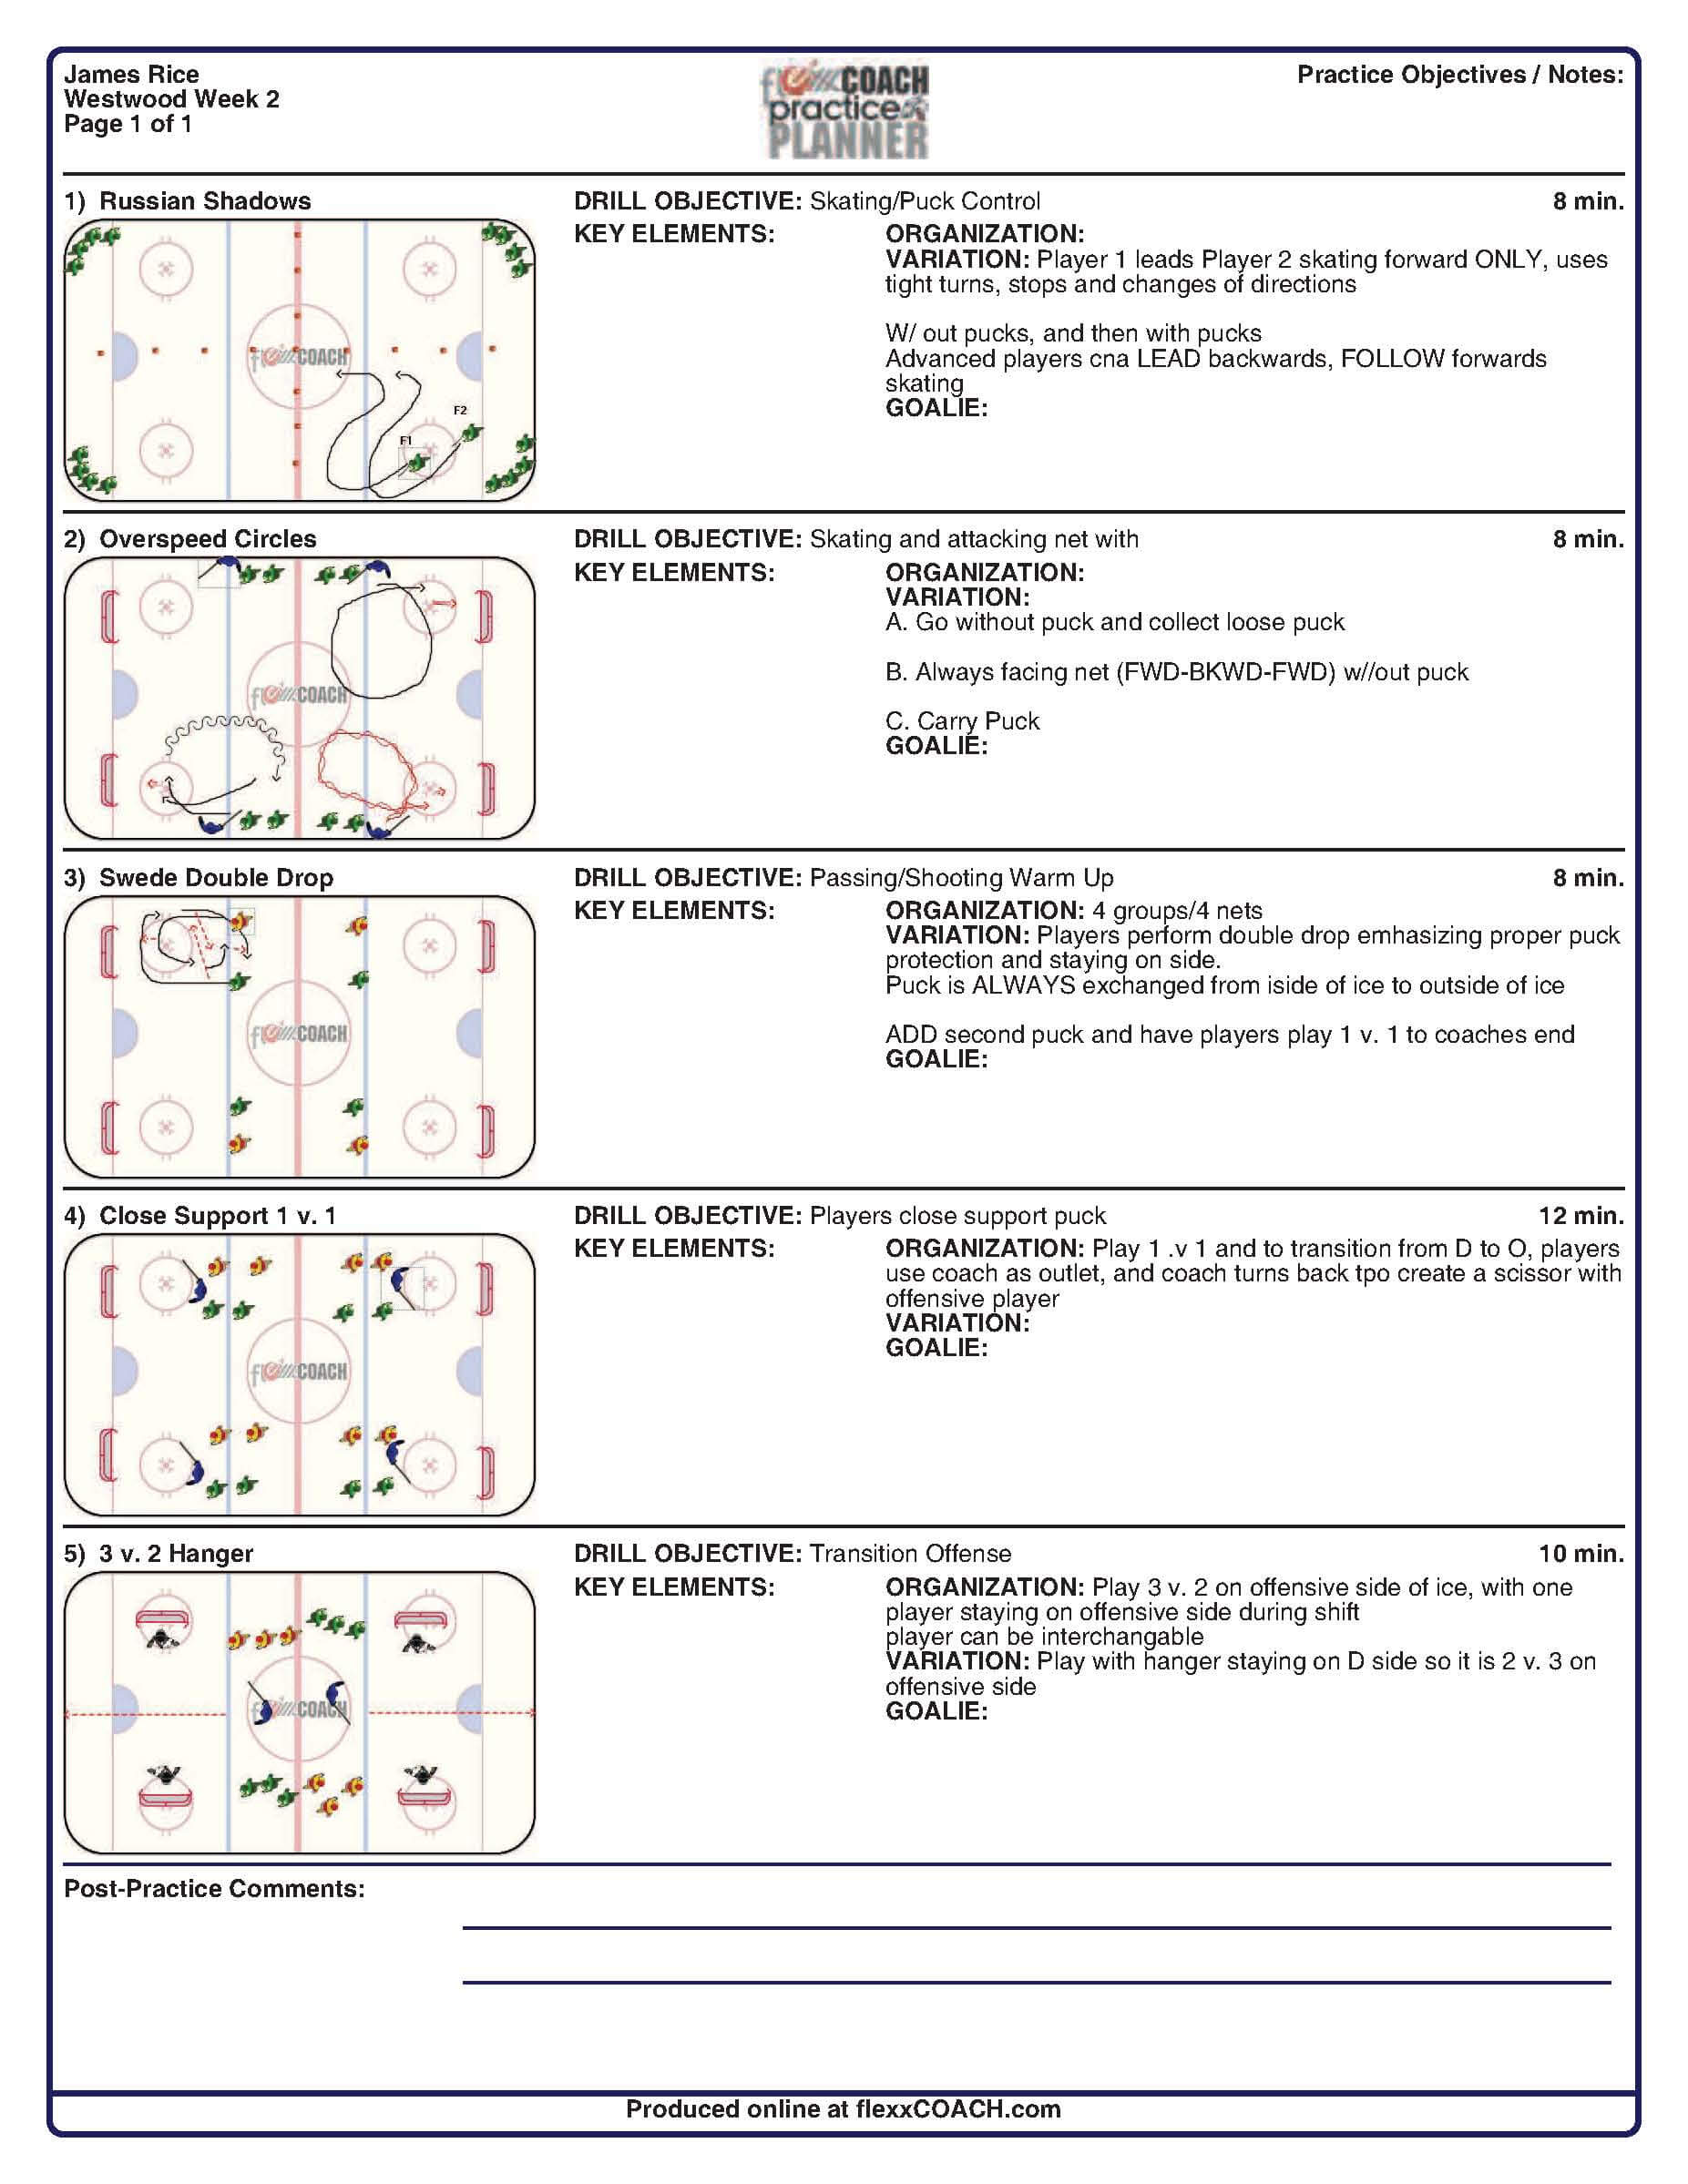 Drill Exchange In Blank Hockey Practice Plan Template